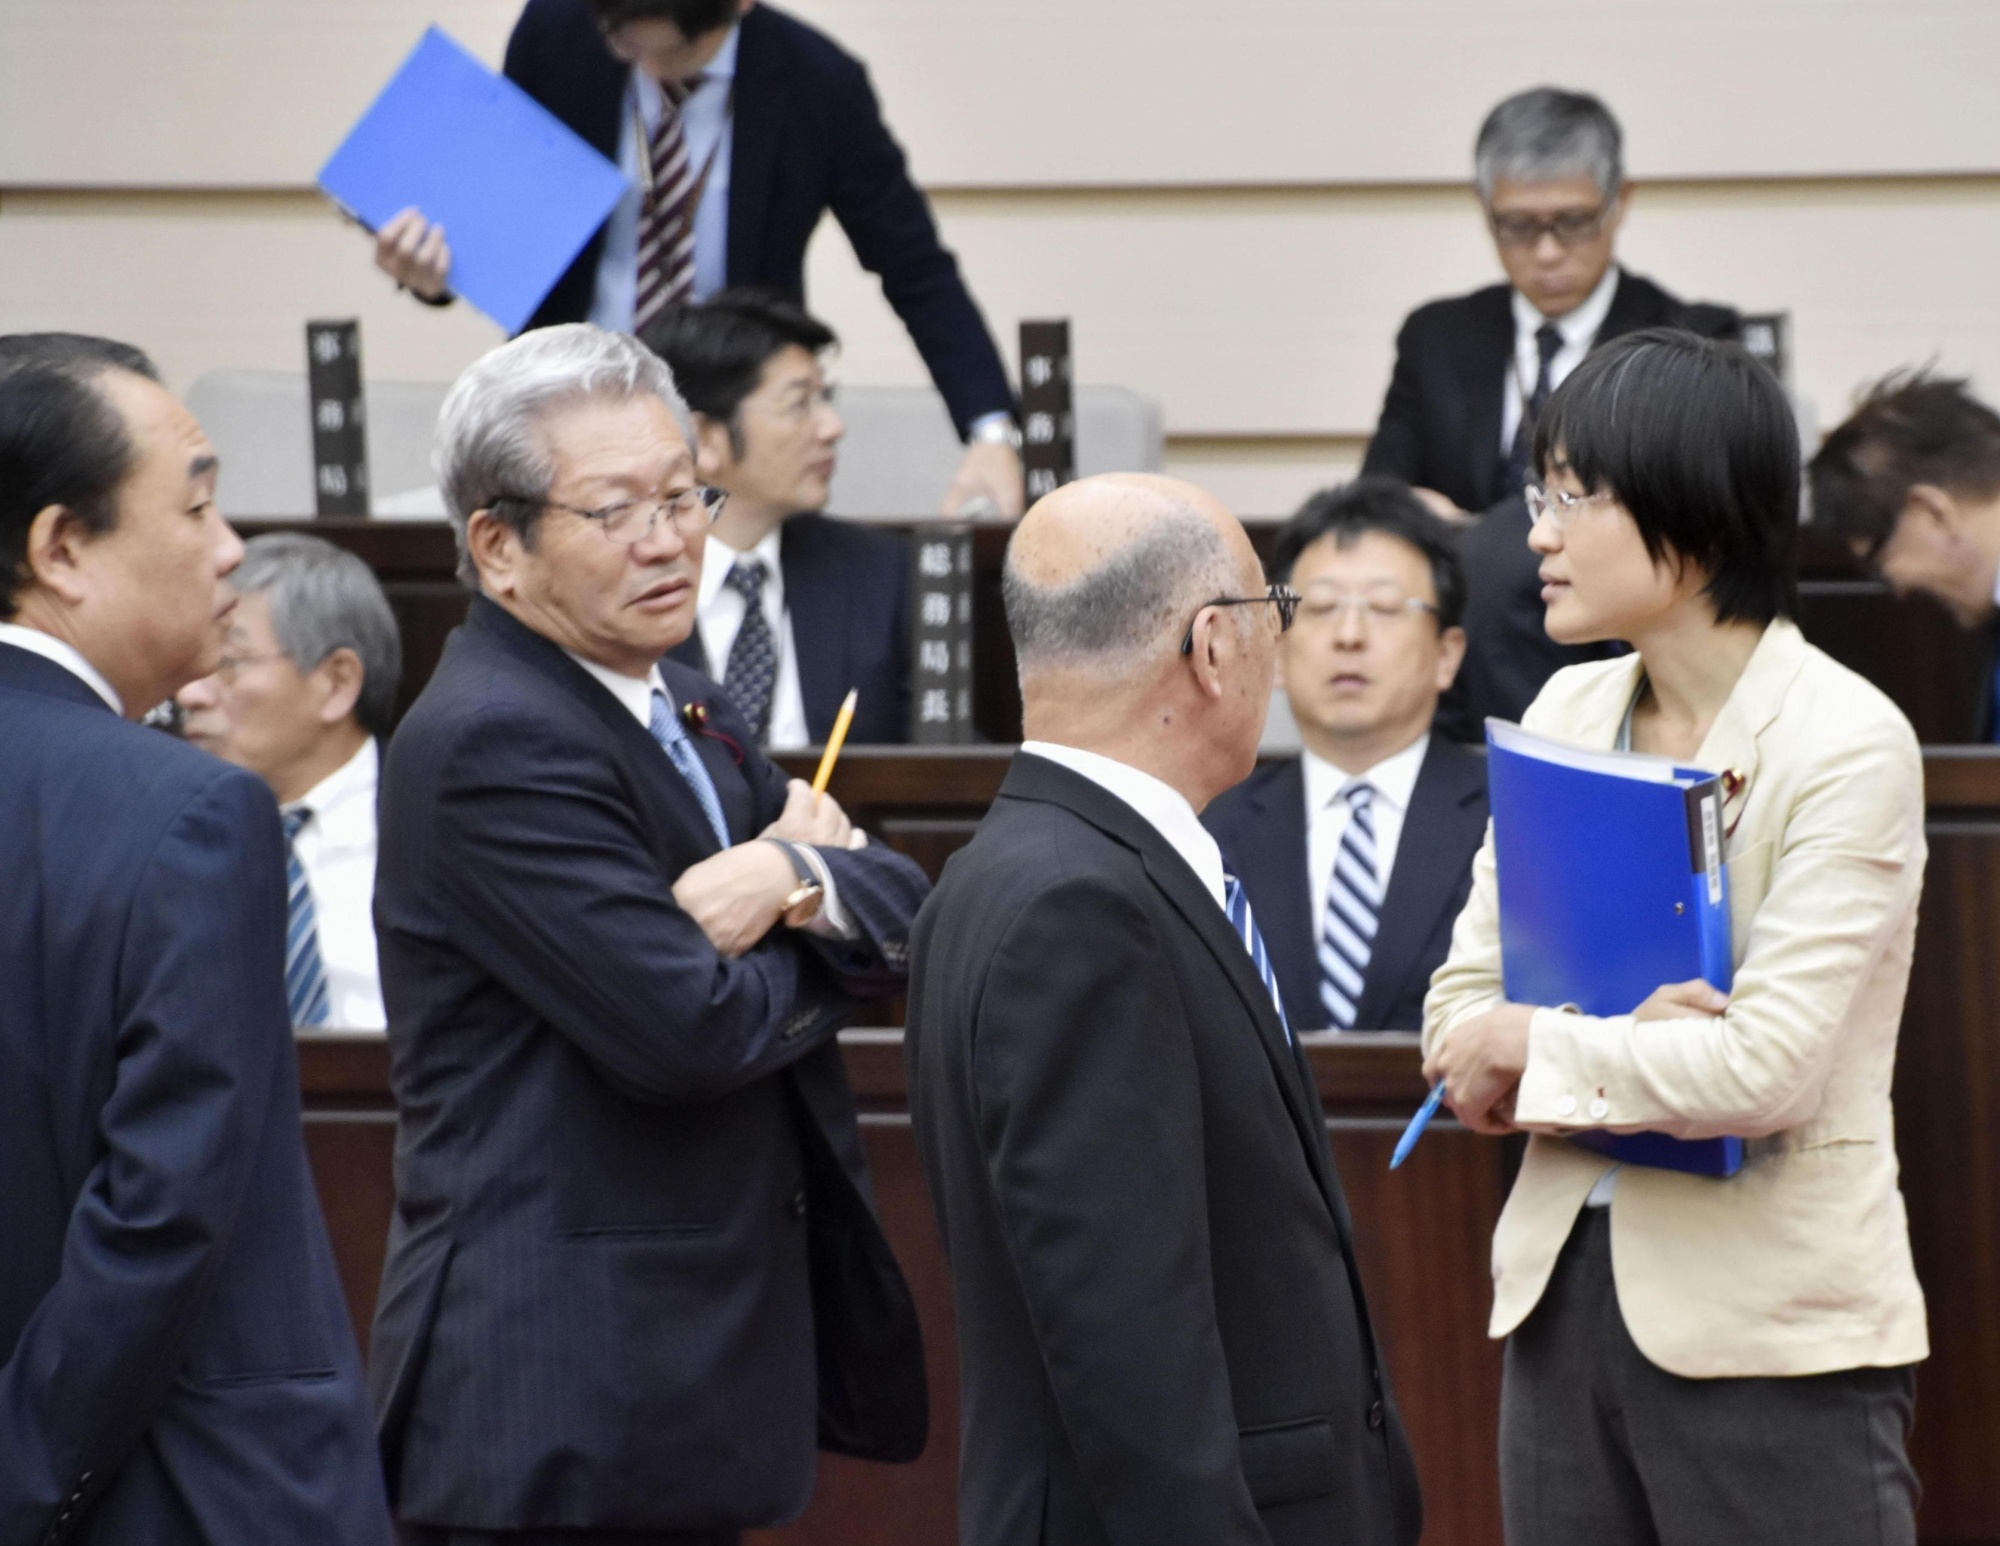 Kumamoto Municipal Assembly member Yuka Ogata is surrounded by fellow assembly members Friday after being criticized for asking questions from the podium while sucking on a cough drop. | KYODO